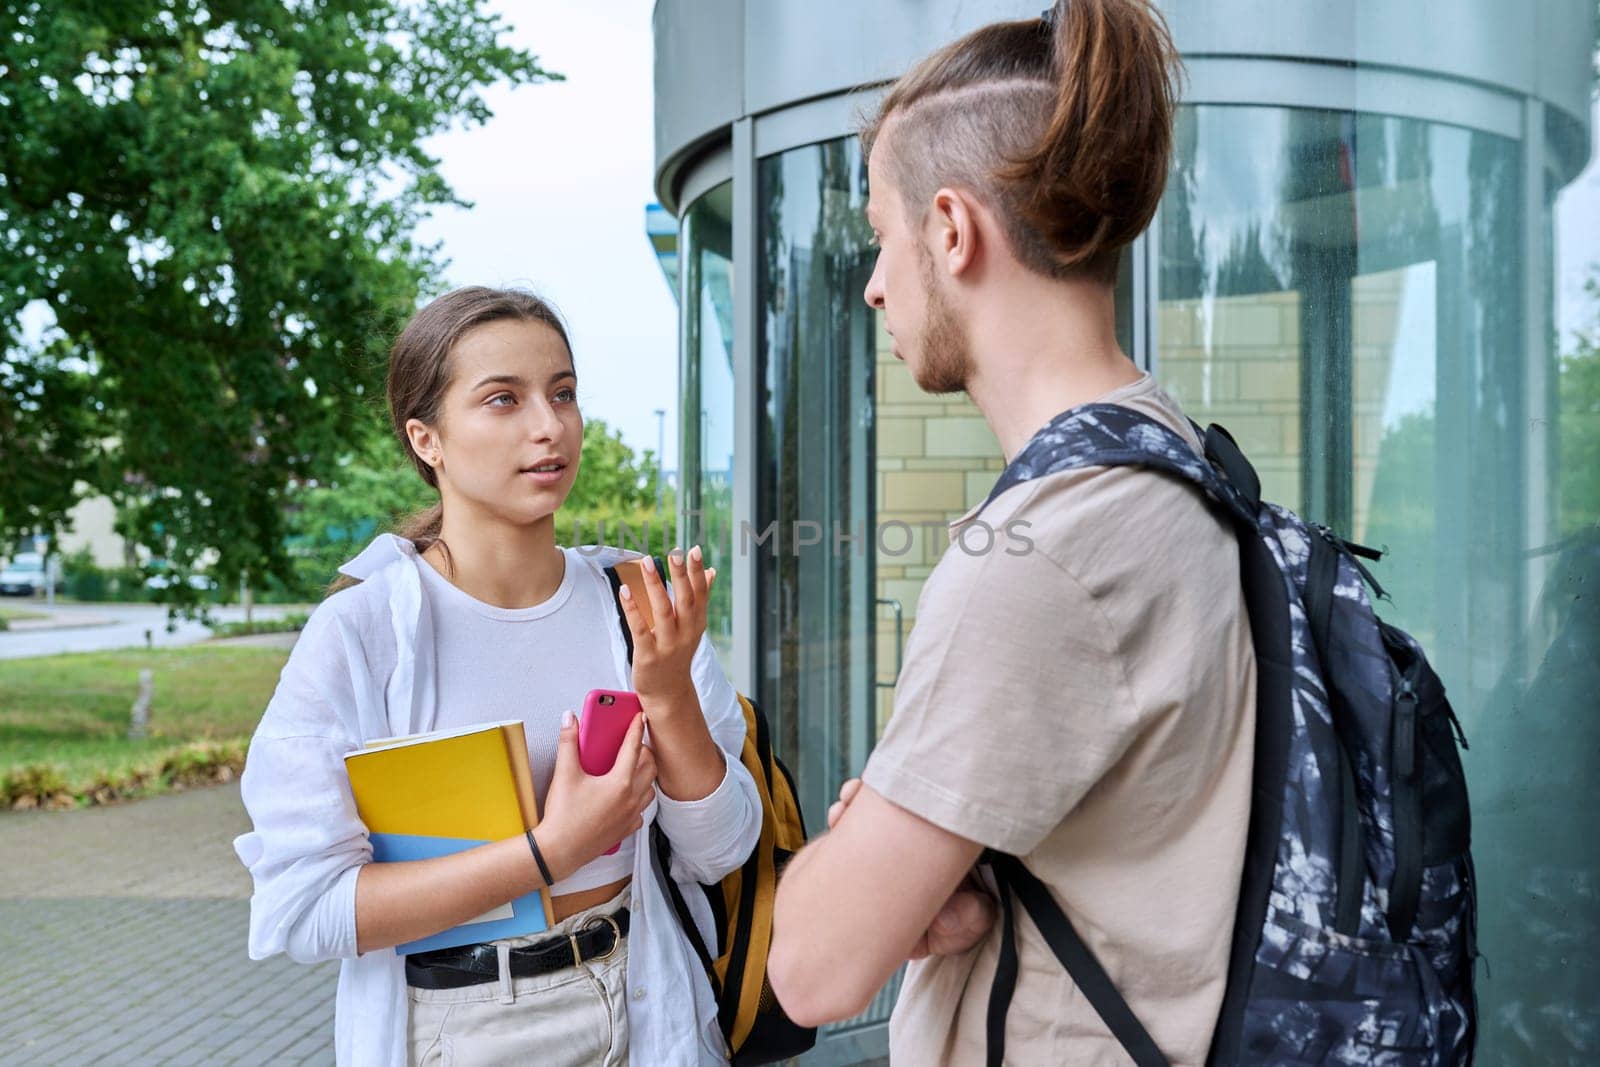 Meeting of two teenage students, guy and girl, near educational building by VH-studio